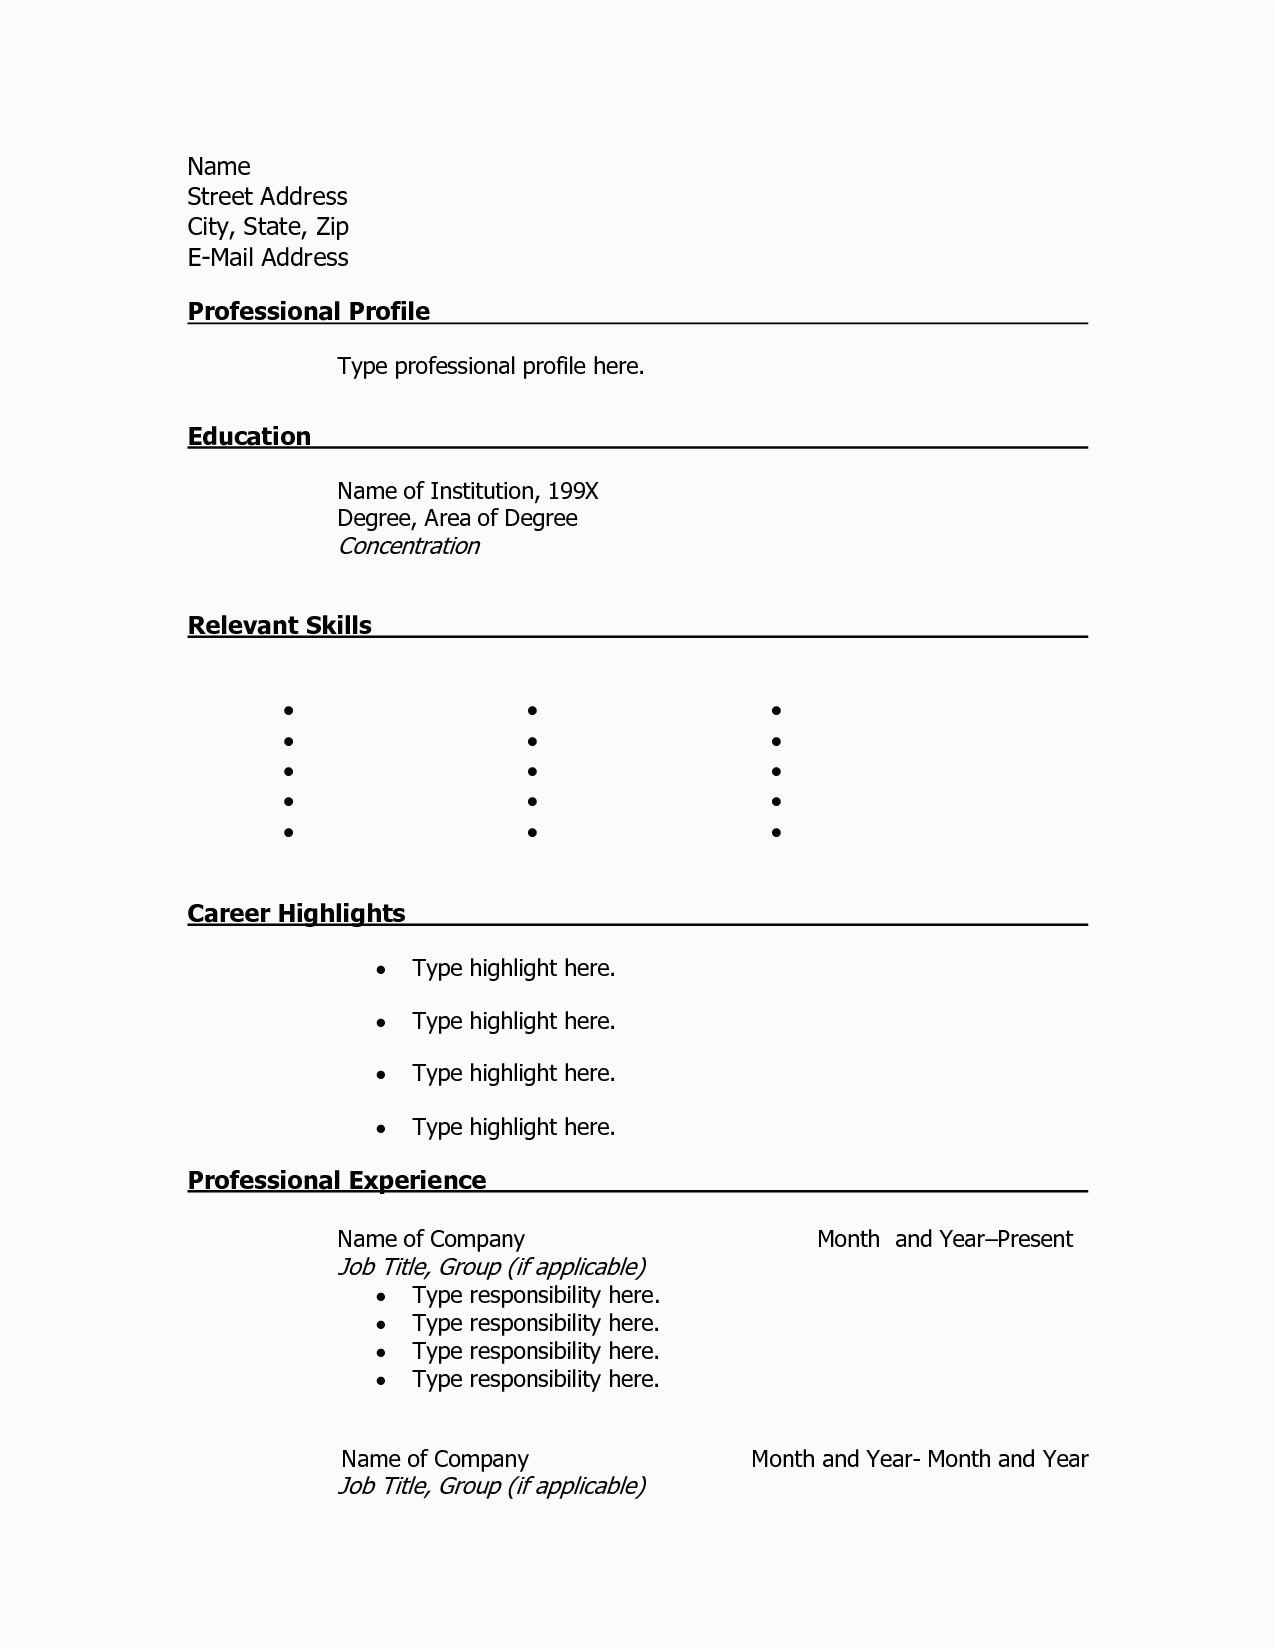 Blank Resume Template for High School Students Free Printable Fill In the Blank Resume Templates